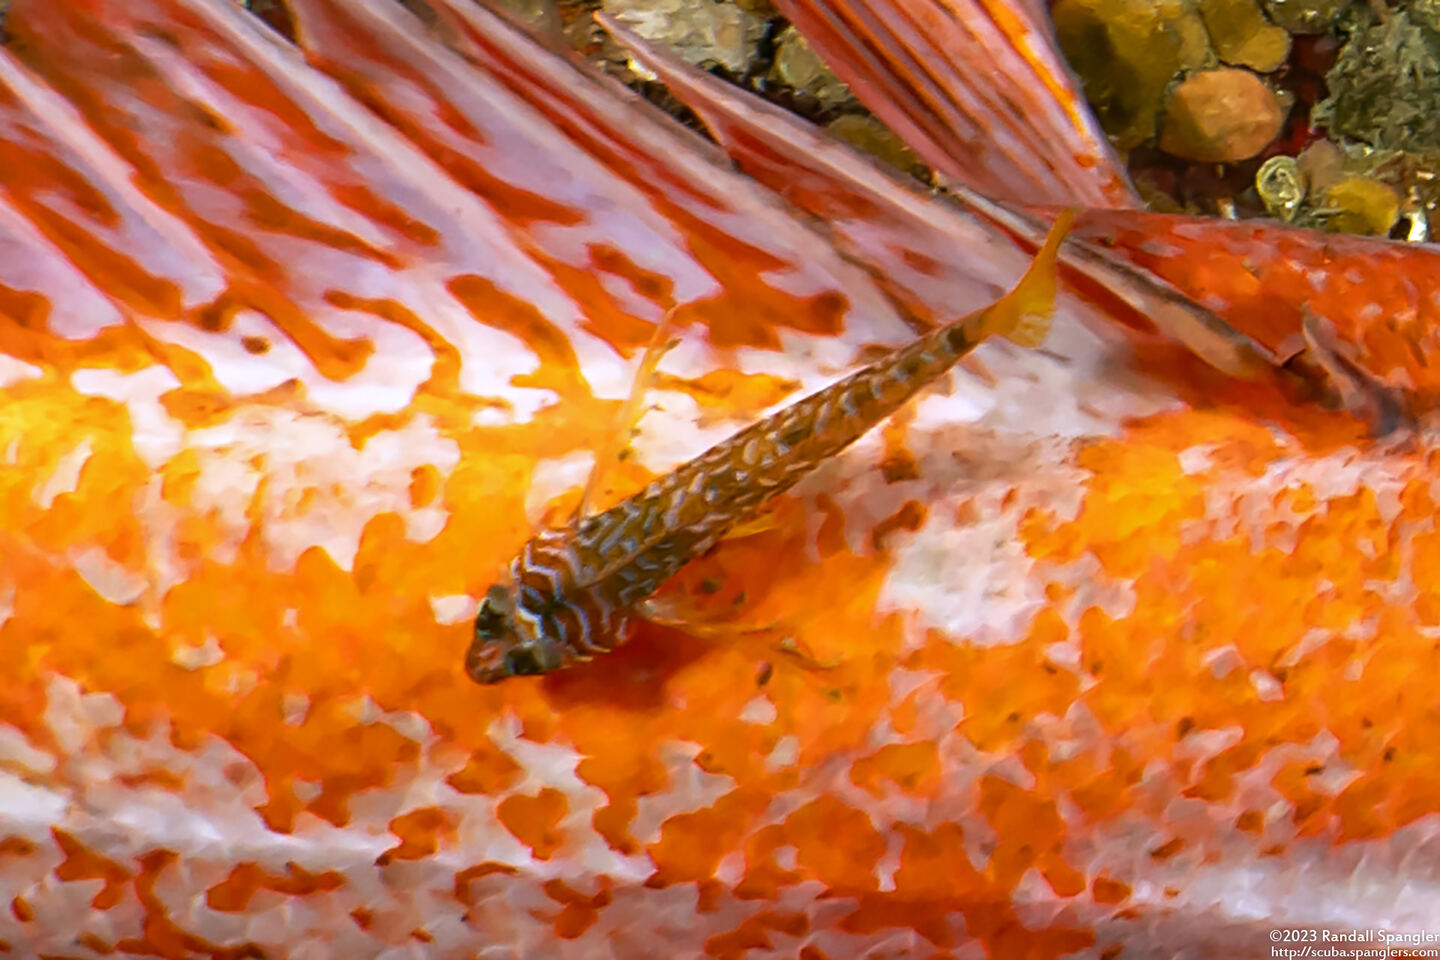 Jordania zonope (Longfin Sculpin); On the back of a vermilion rockfish